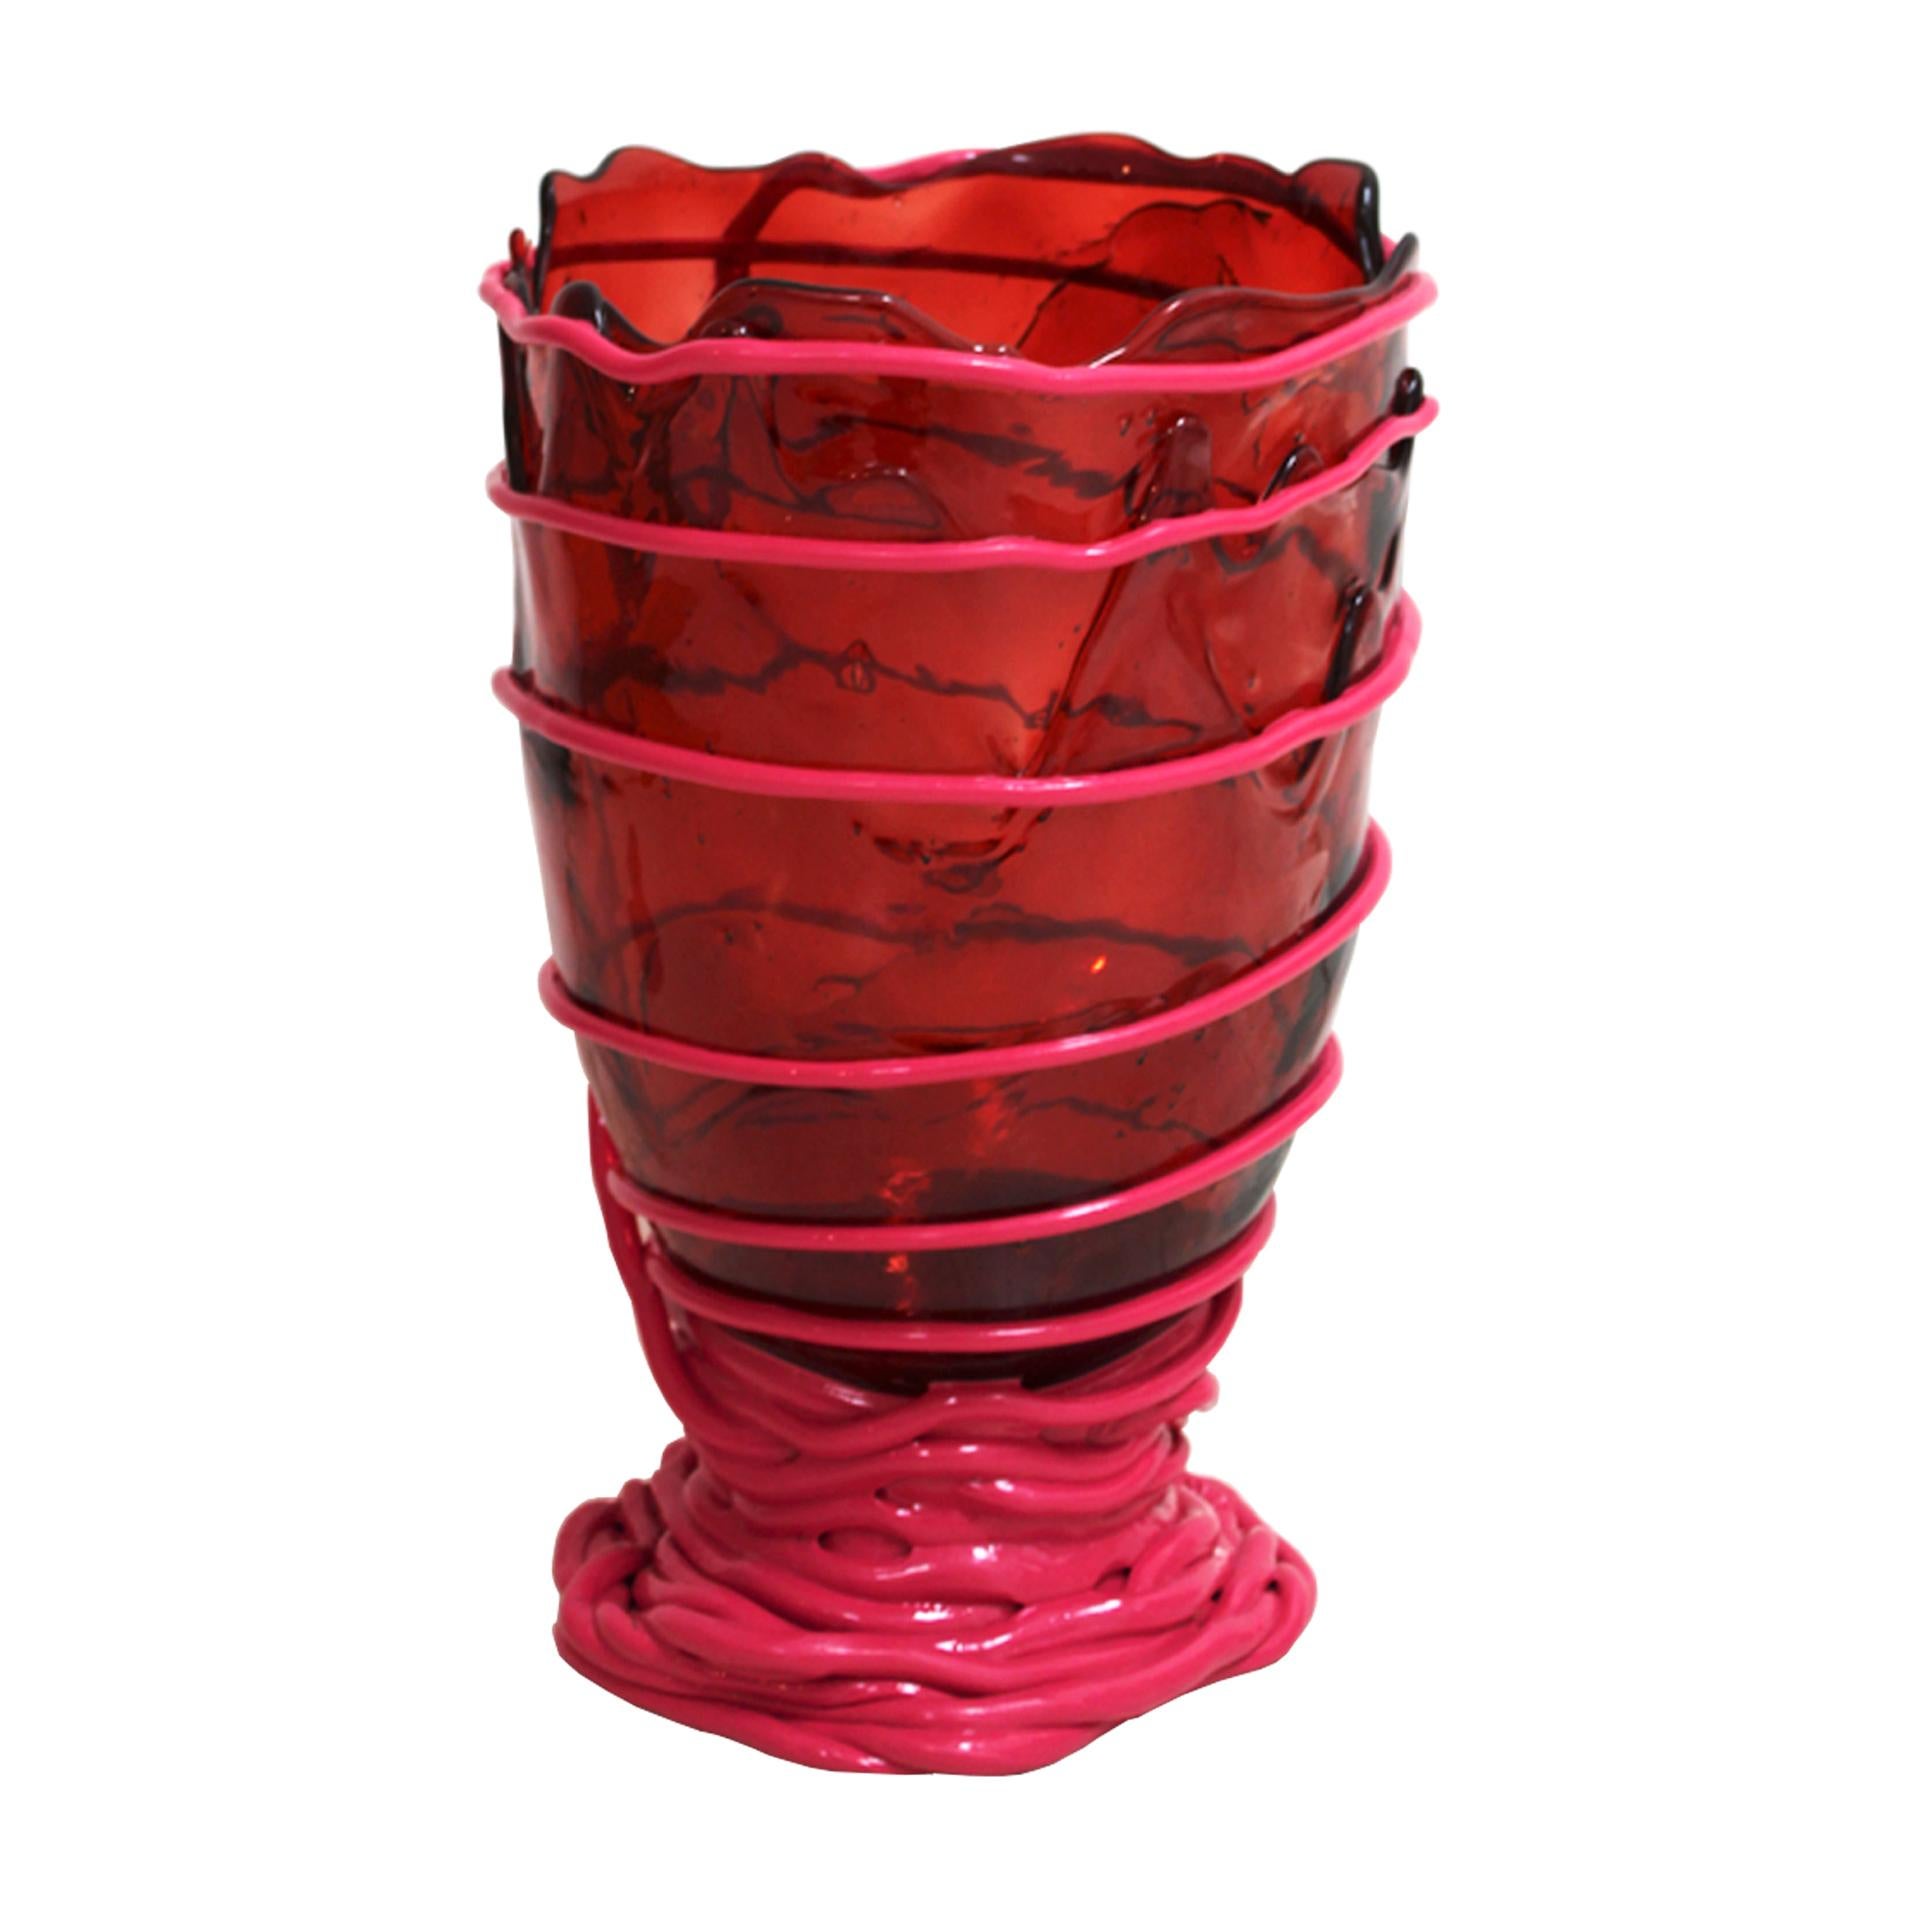 Post-Modern Contemporary Vase Designed by Gaetano Pesce in 1995 for Fish Design, Italy, 2022